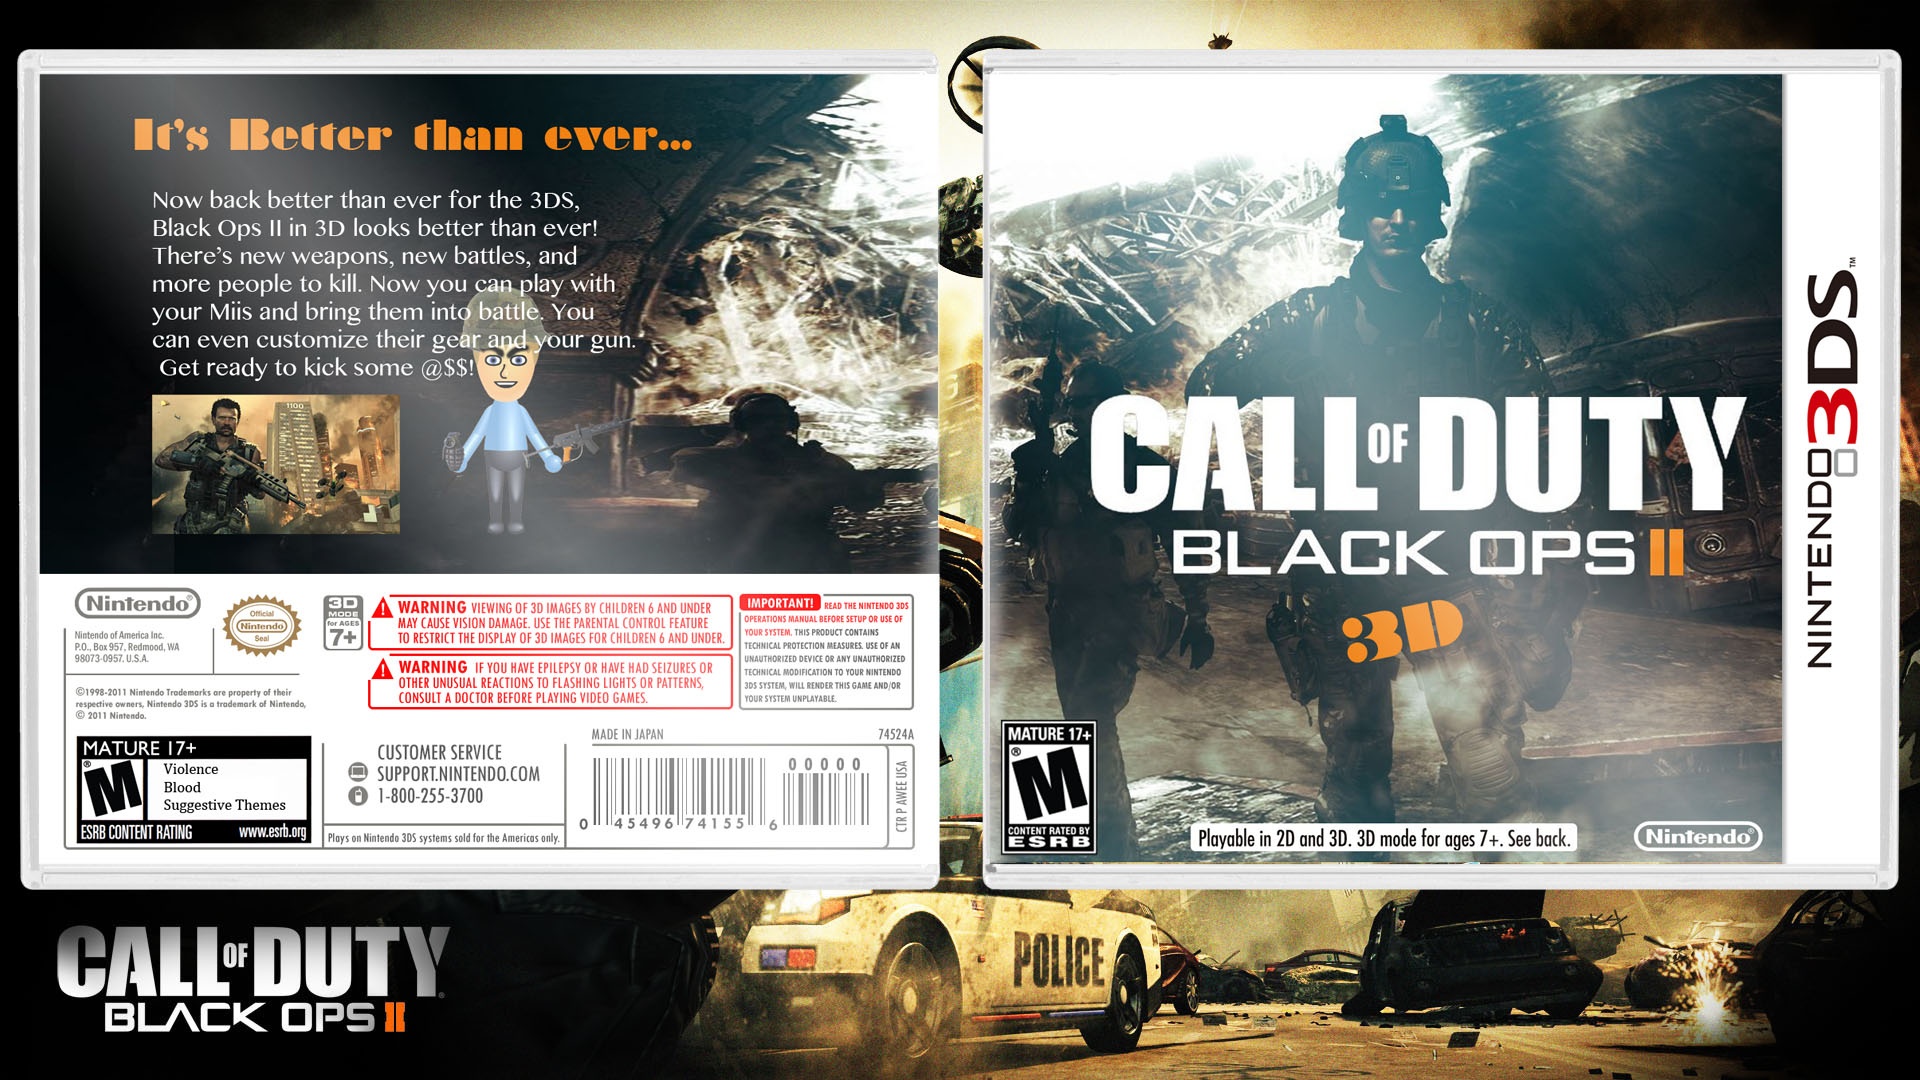 call of duty black ops ds arcade mode